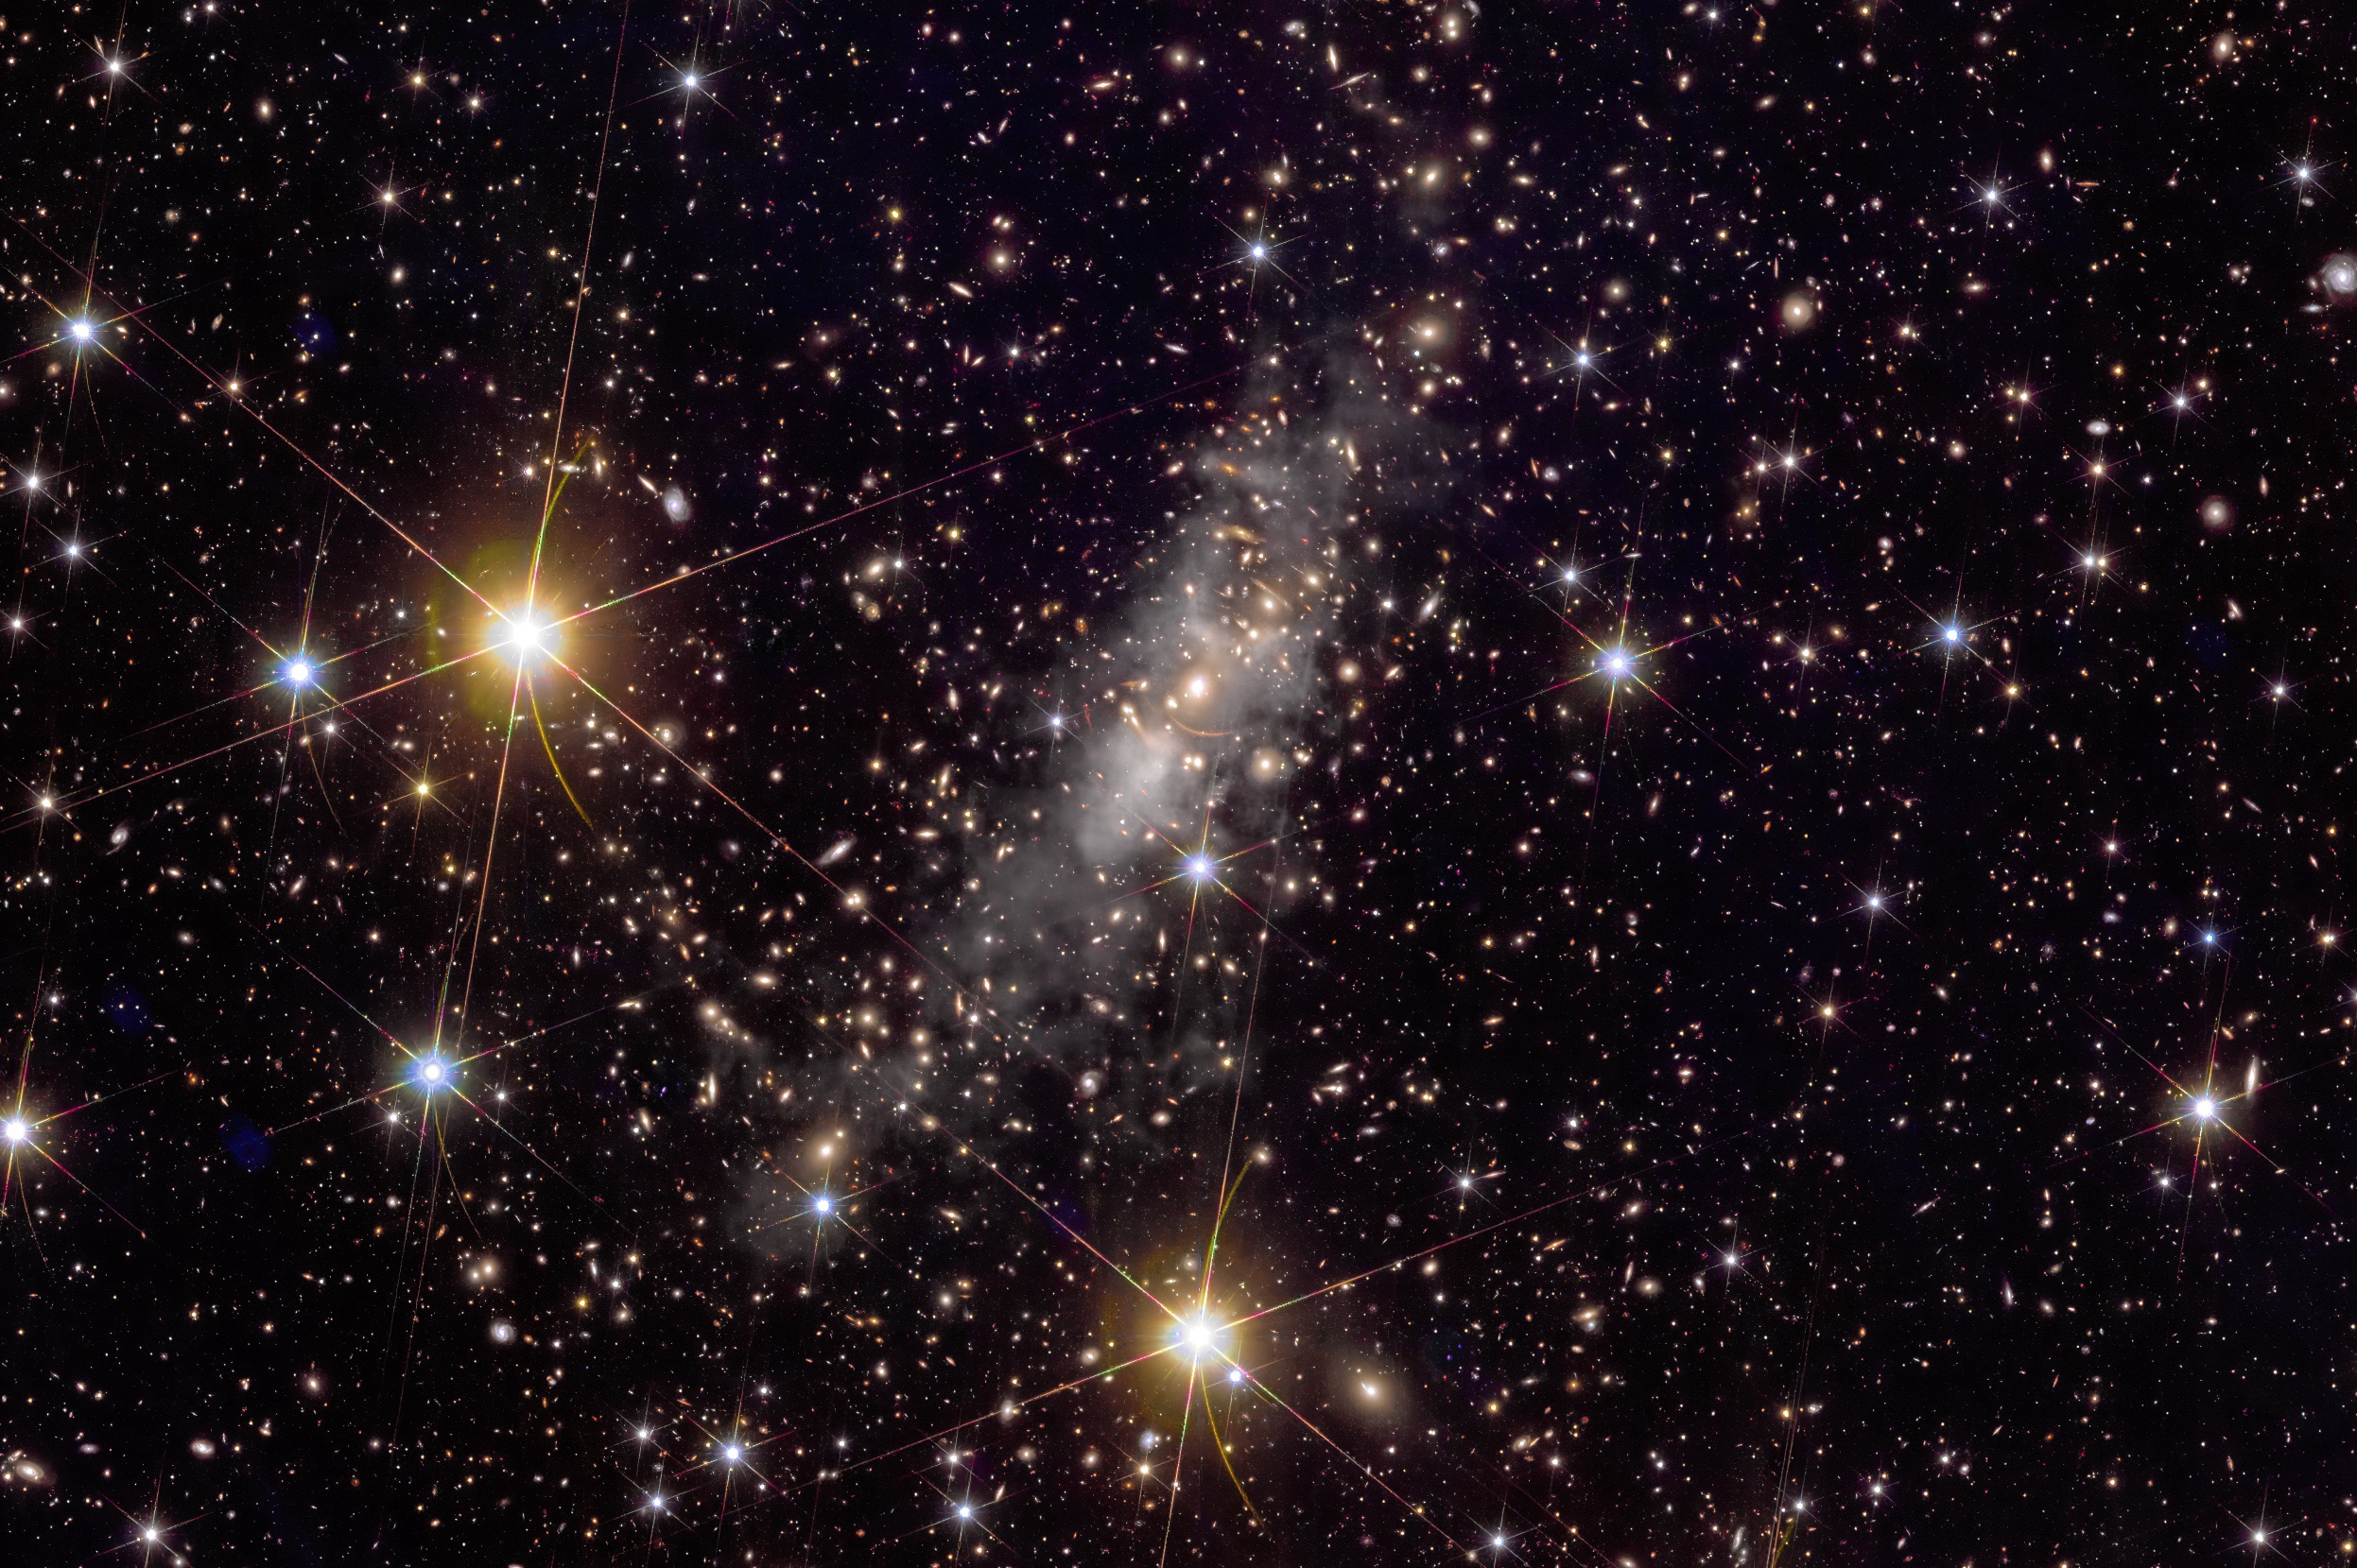 Arcs of light from background galaxies appear among the galaxies of Abell 2390. The gray “haze” is intracluster light emitted by stars that were expelled from their home galaxies. Such stellar orphans may help astronomers to “see” where dark matter is located. Credit: ESA/Euclid/Euclid Consortium/NASA, image processing by J.-C. Cuillandre (CEA Paris-Saclay), G. Anselmi